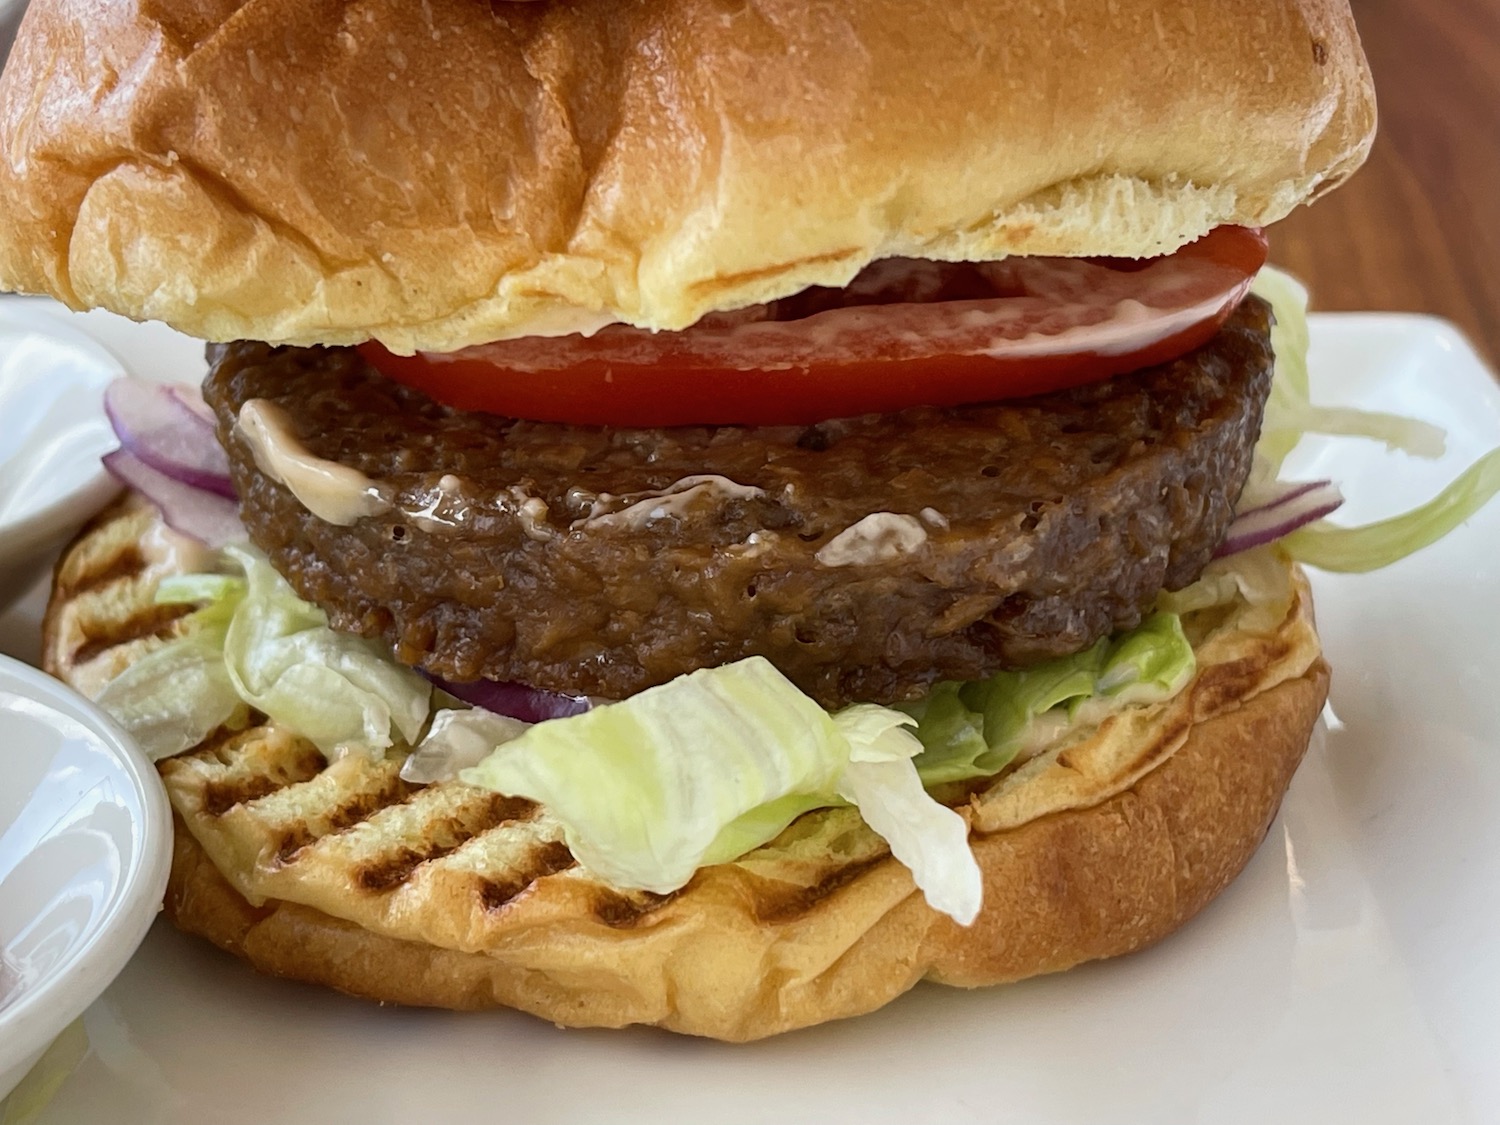 a burger with lettuce and tomato on a white plate